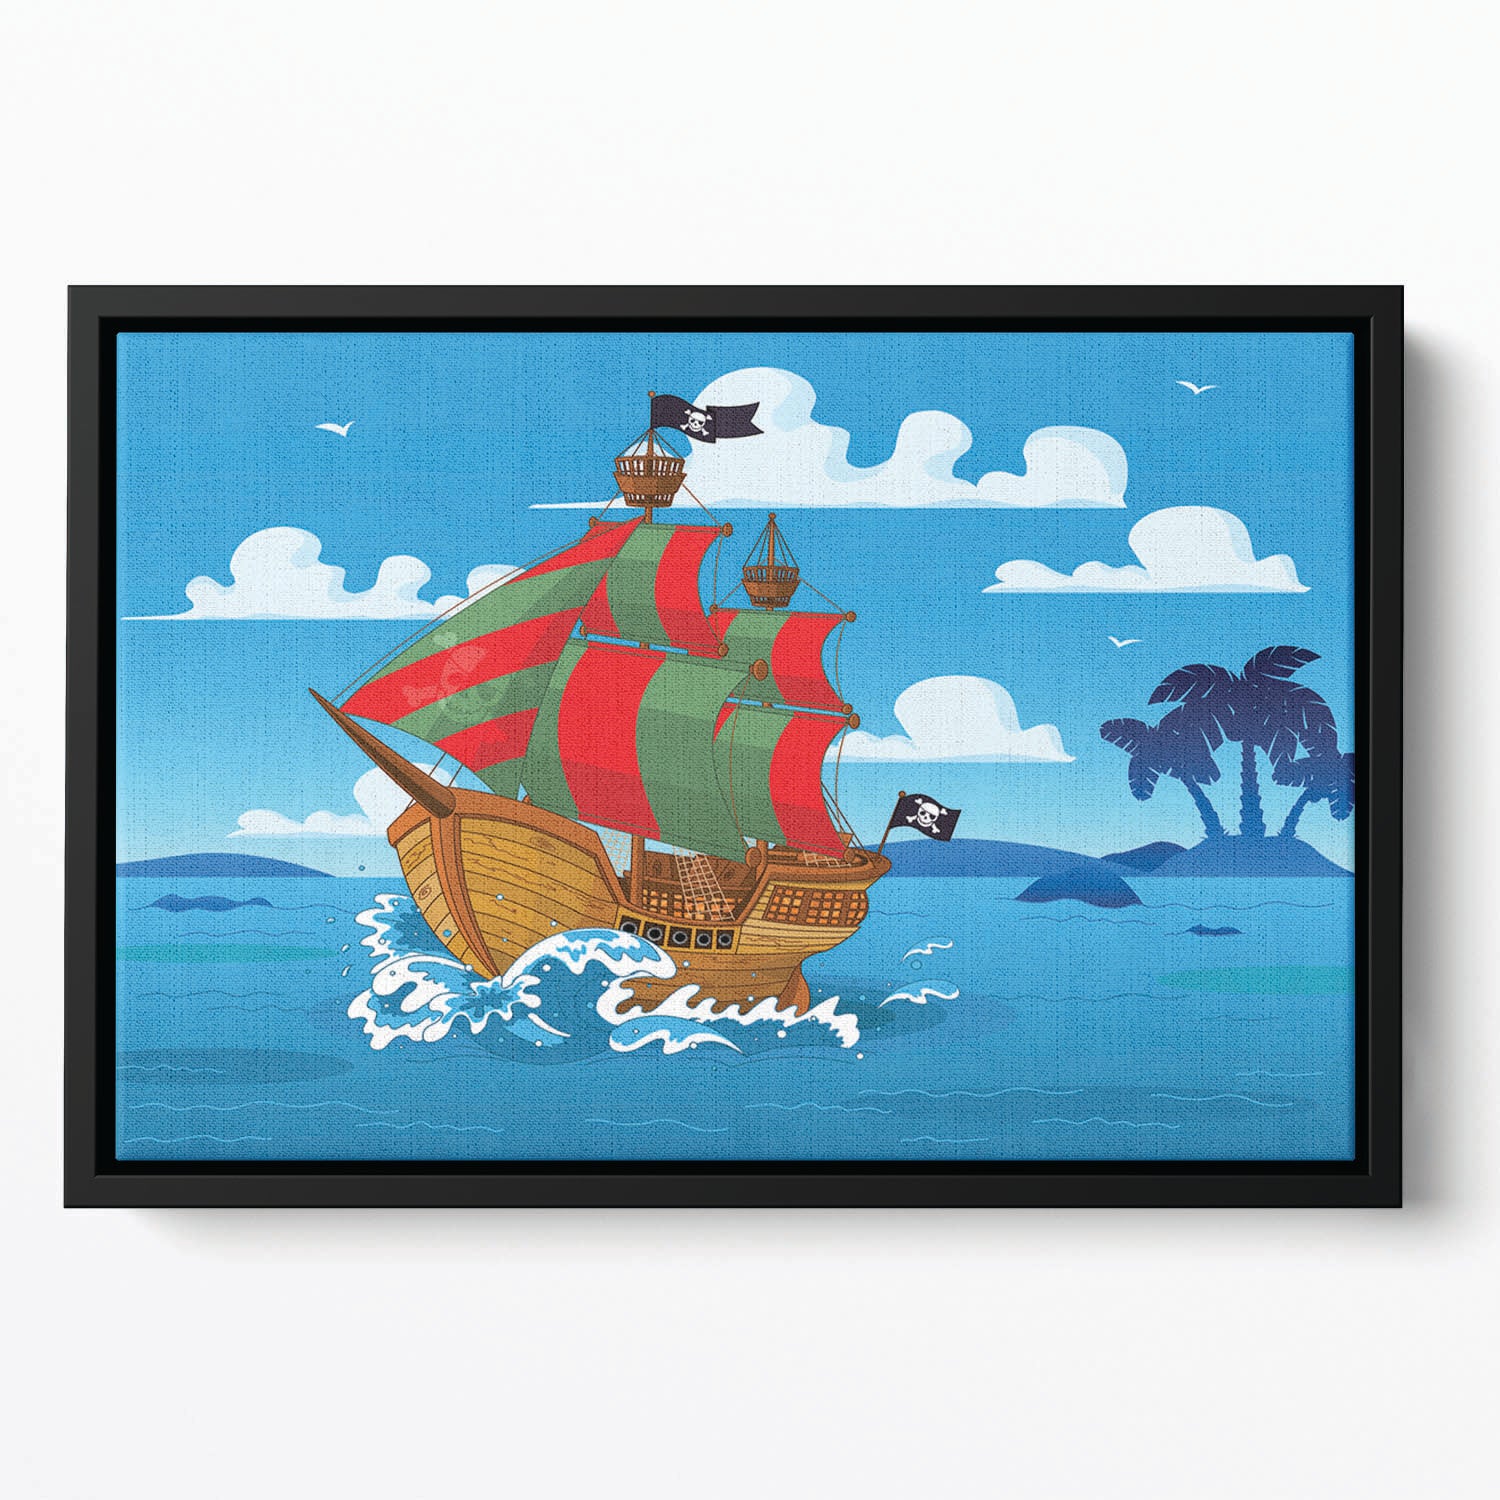 Pirate ship sails the seas Floating Framed Canvas